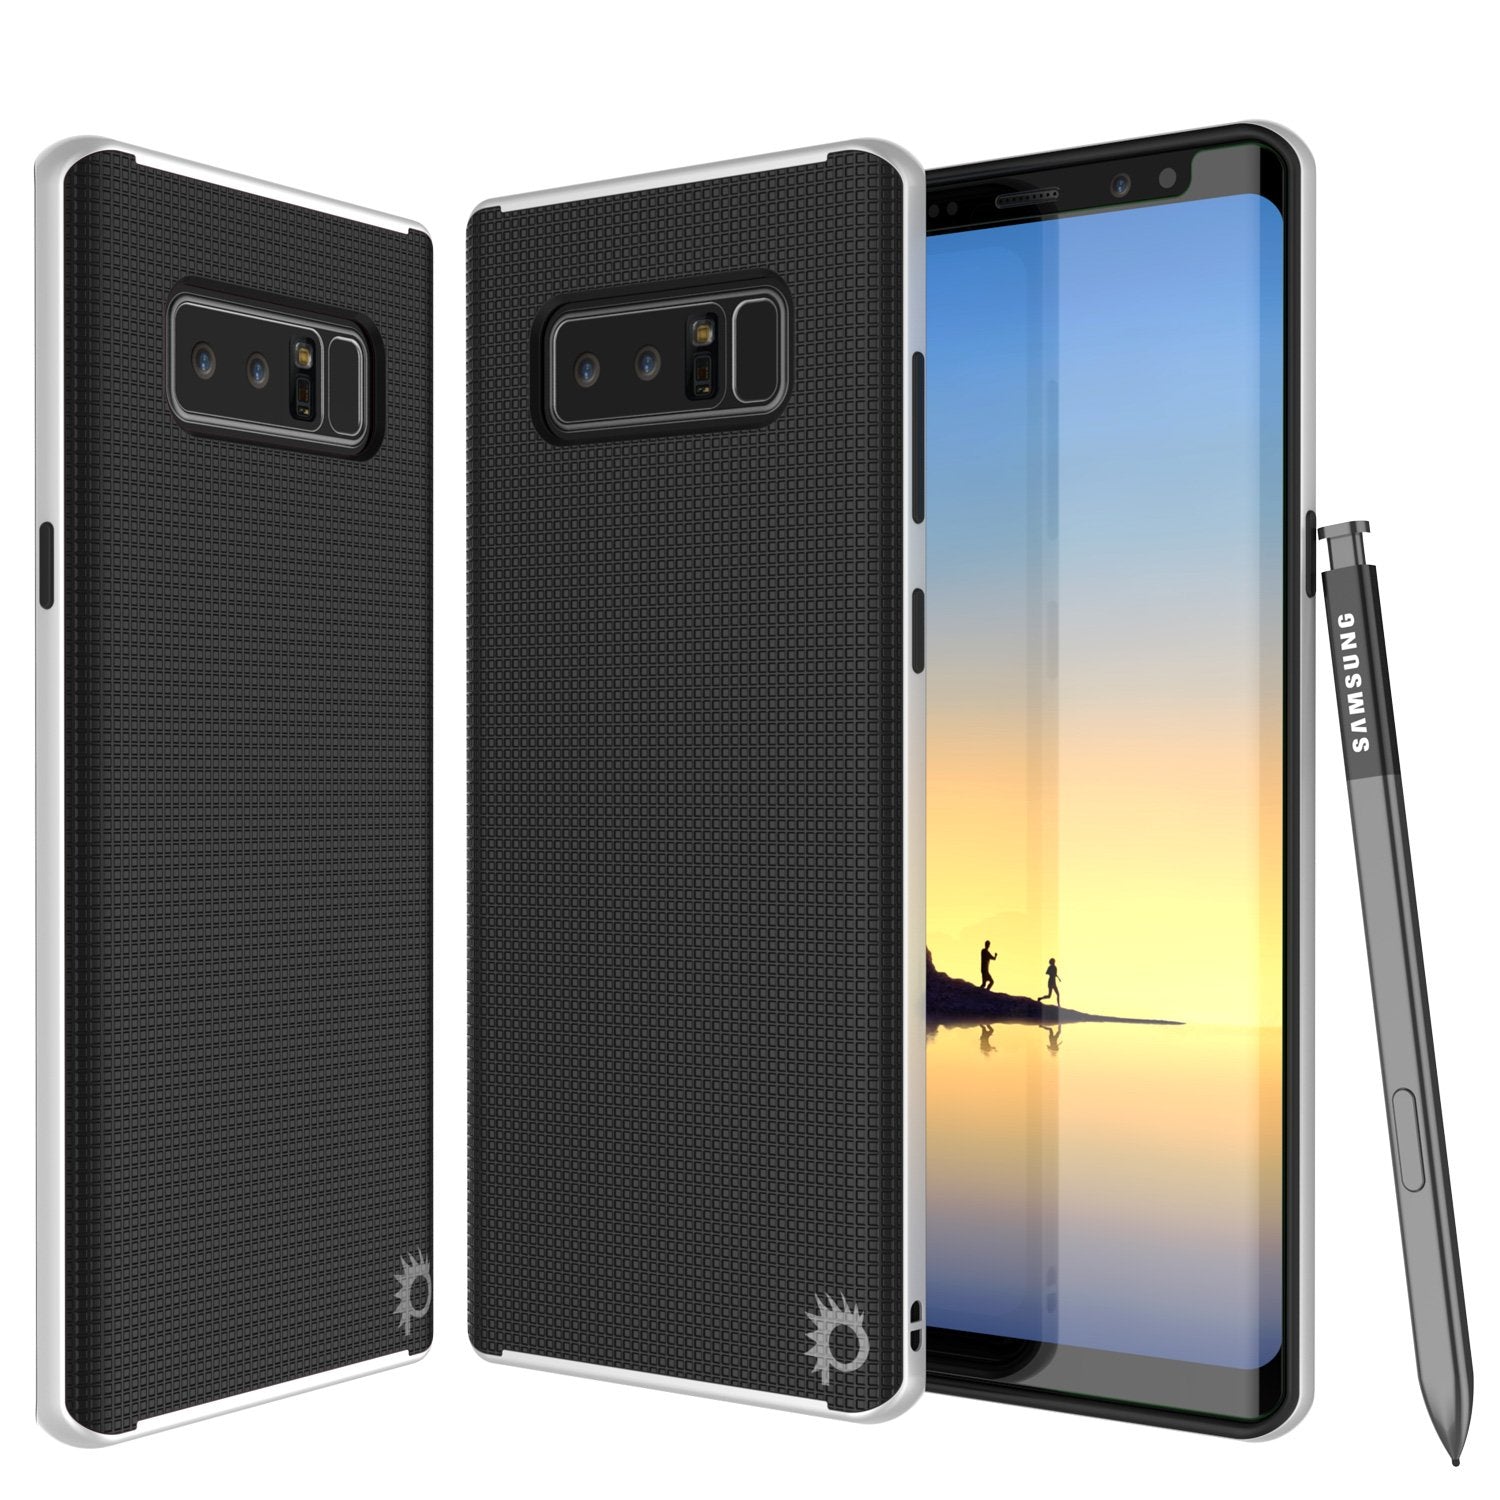 Galaxy Note 8 Case, PunkCase [Stealth Series] Hybrid 3-Piece Shockproof Dual Layer Cover [Non-Slip] [Soft TPU + PC Bumper] with PUNKSHIELD Screen Protector for Samsung Note 8 [White]